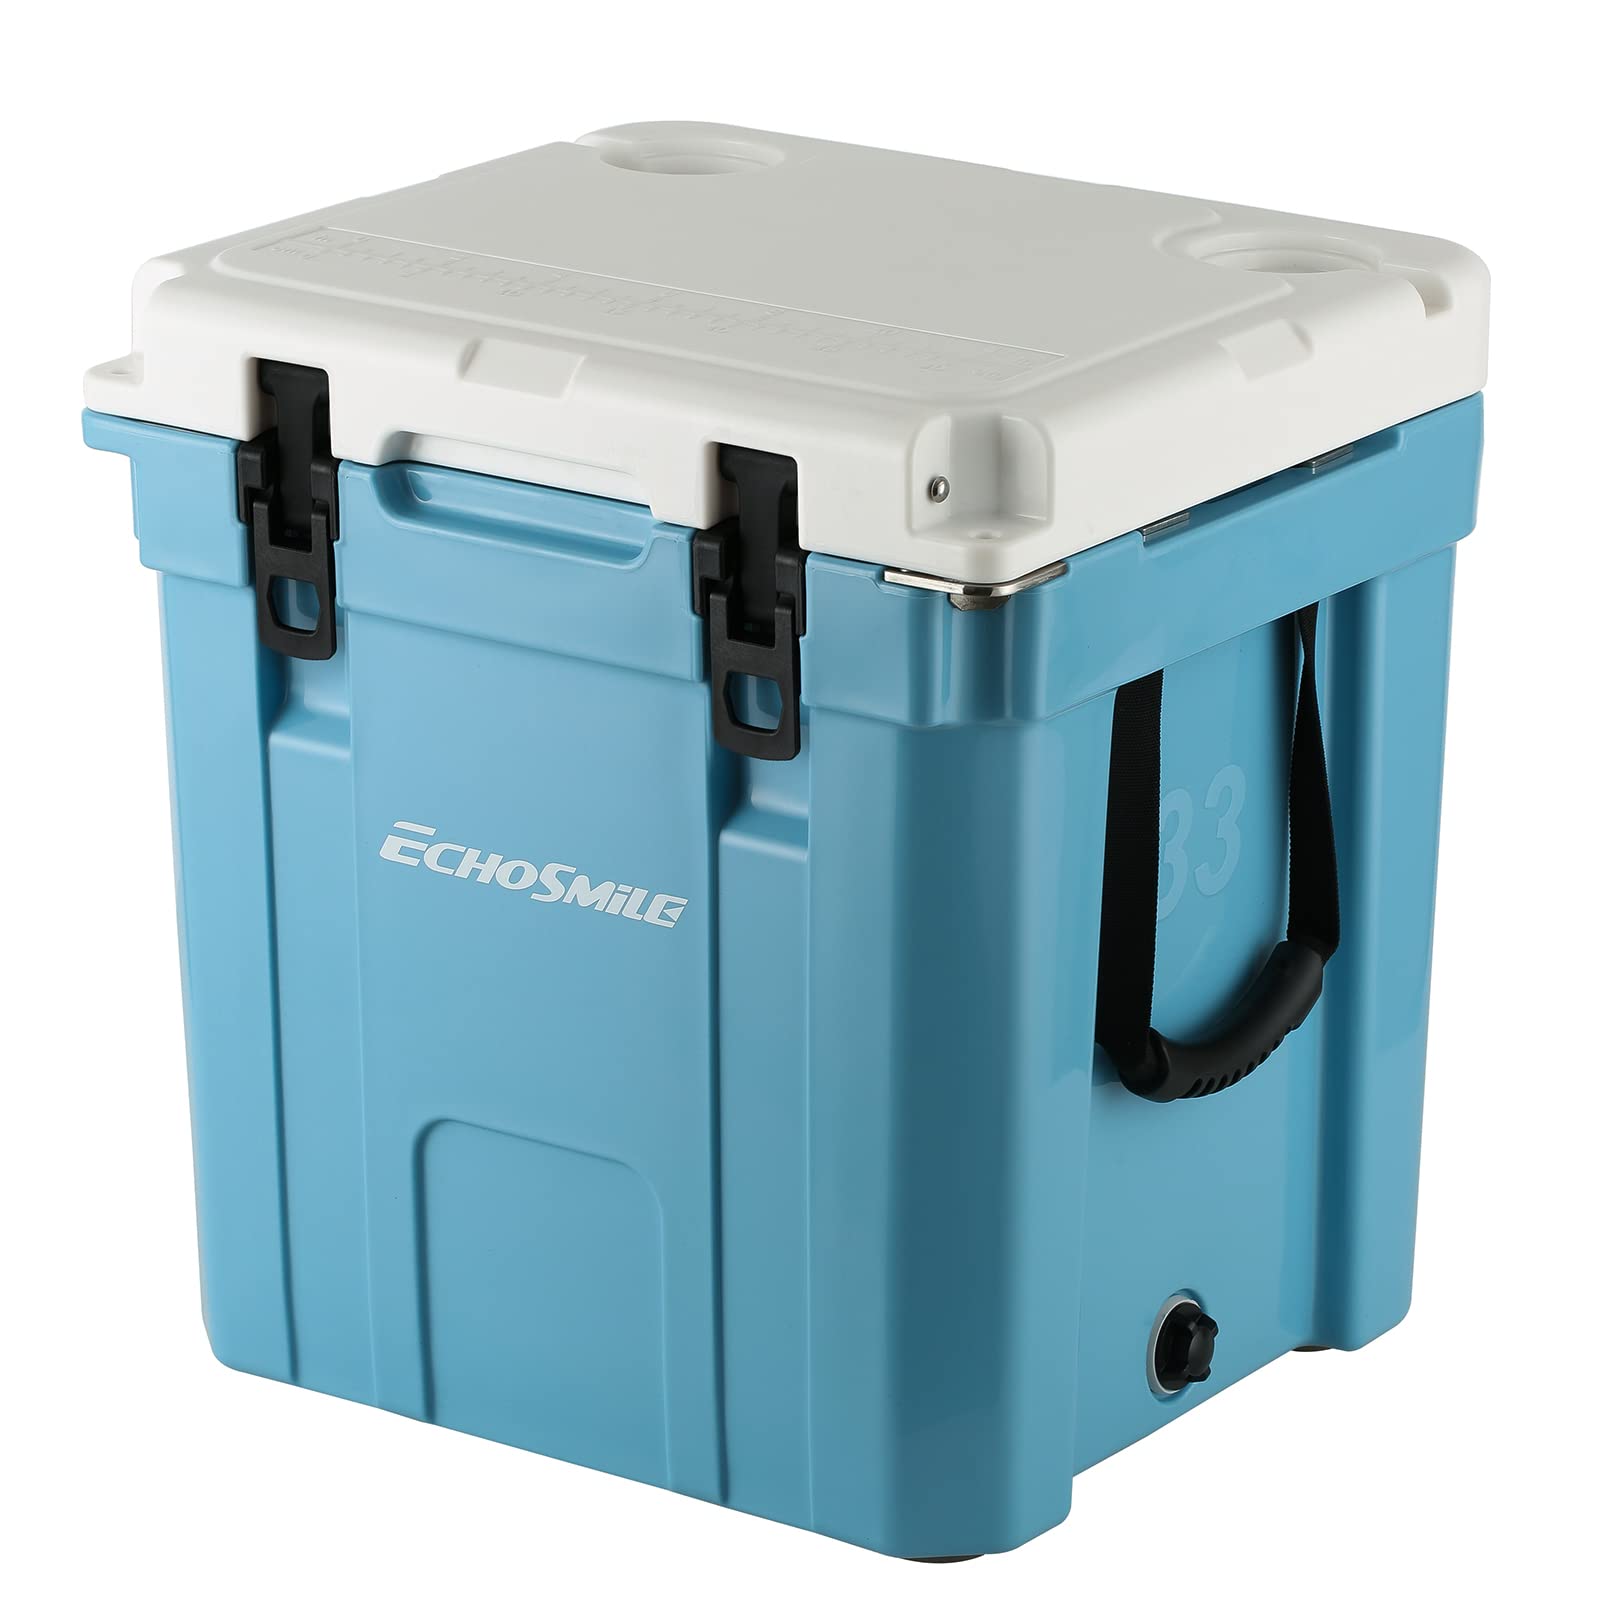 EchoSmile 35 Quart Rotomolded Cooler 5 Days Protale Ice Cooler Tan Ice Chest with Built-in Bottle Openers Cup Holders and